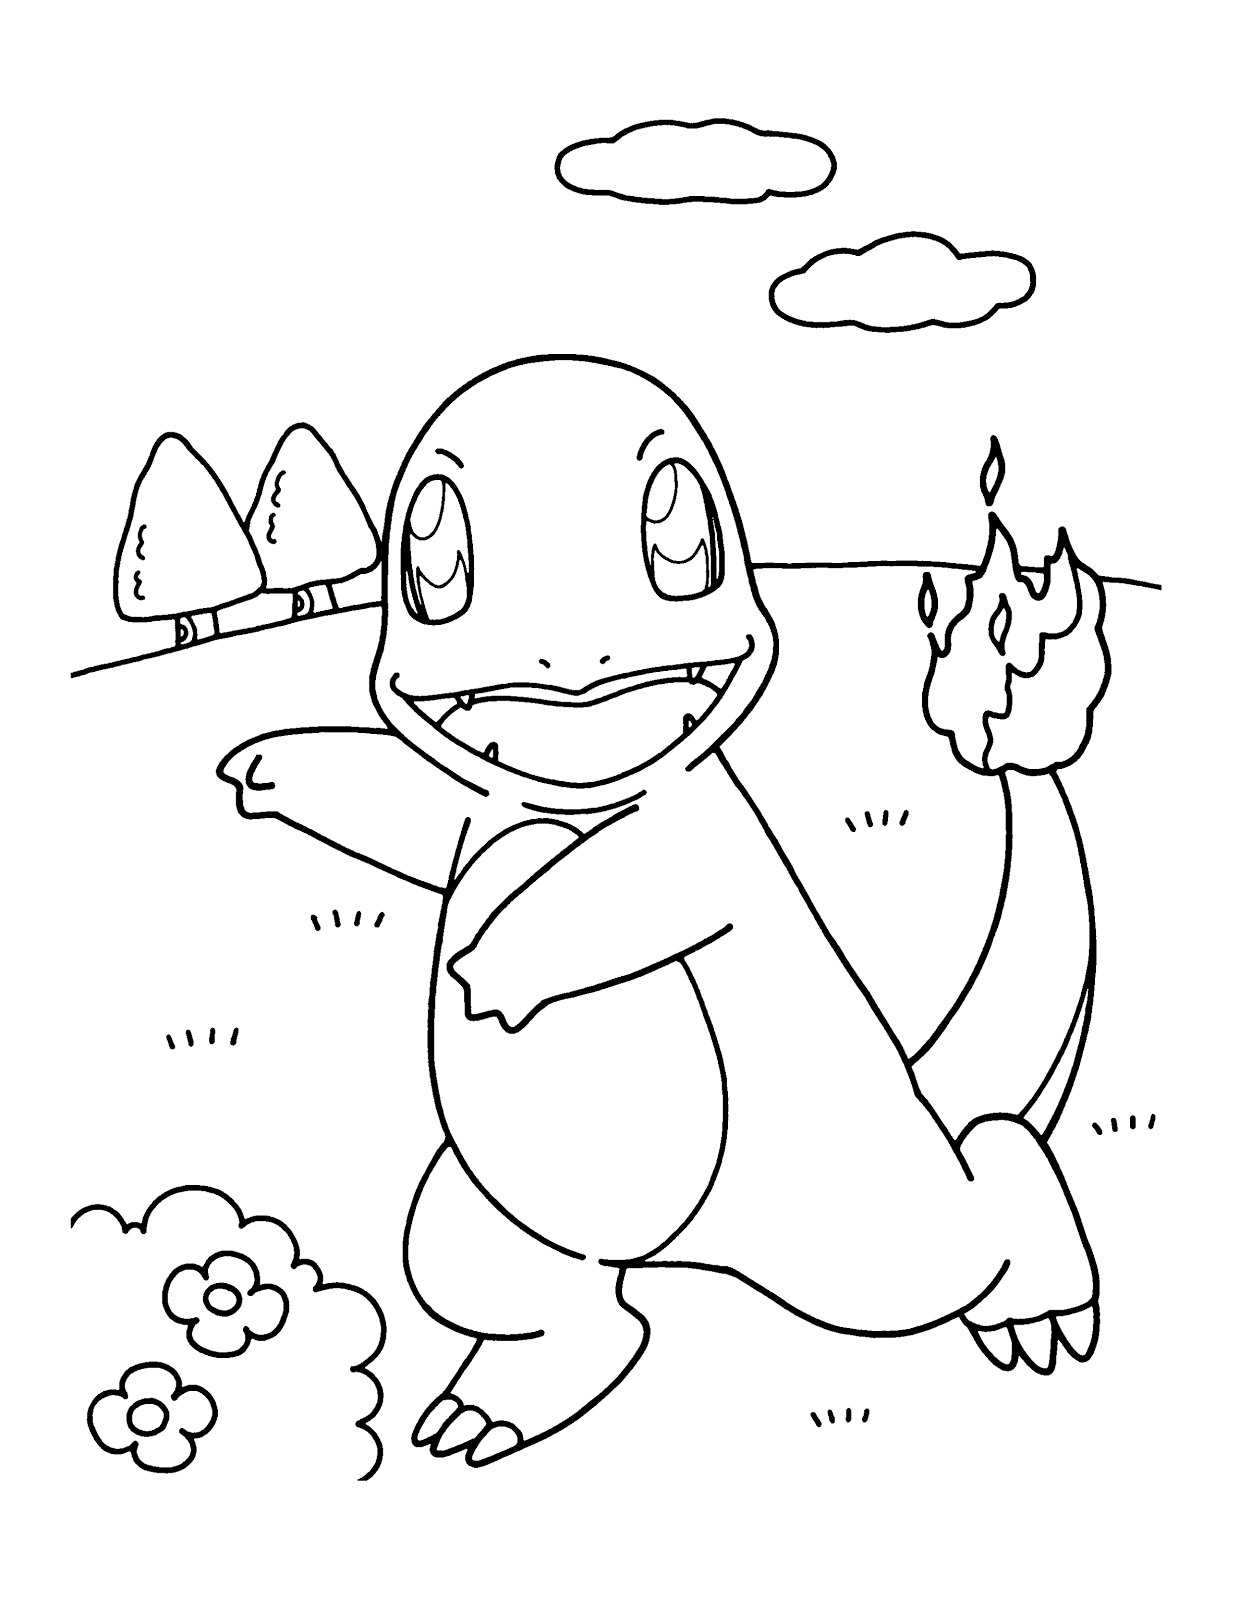 charmander-coloring-pages-free-pokemon-coloring-pages